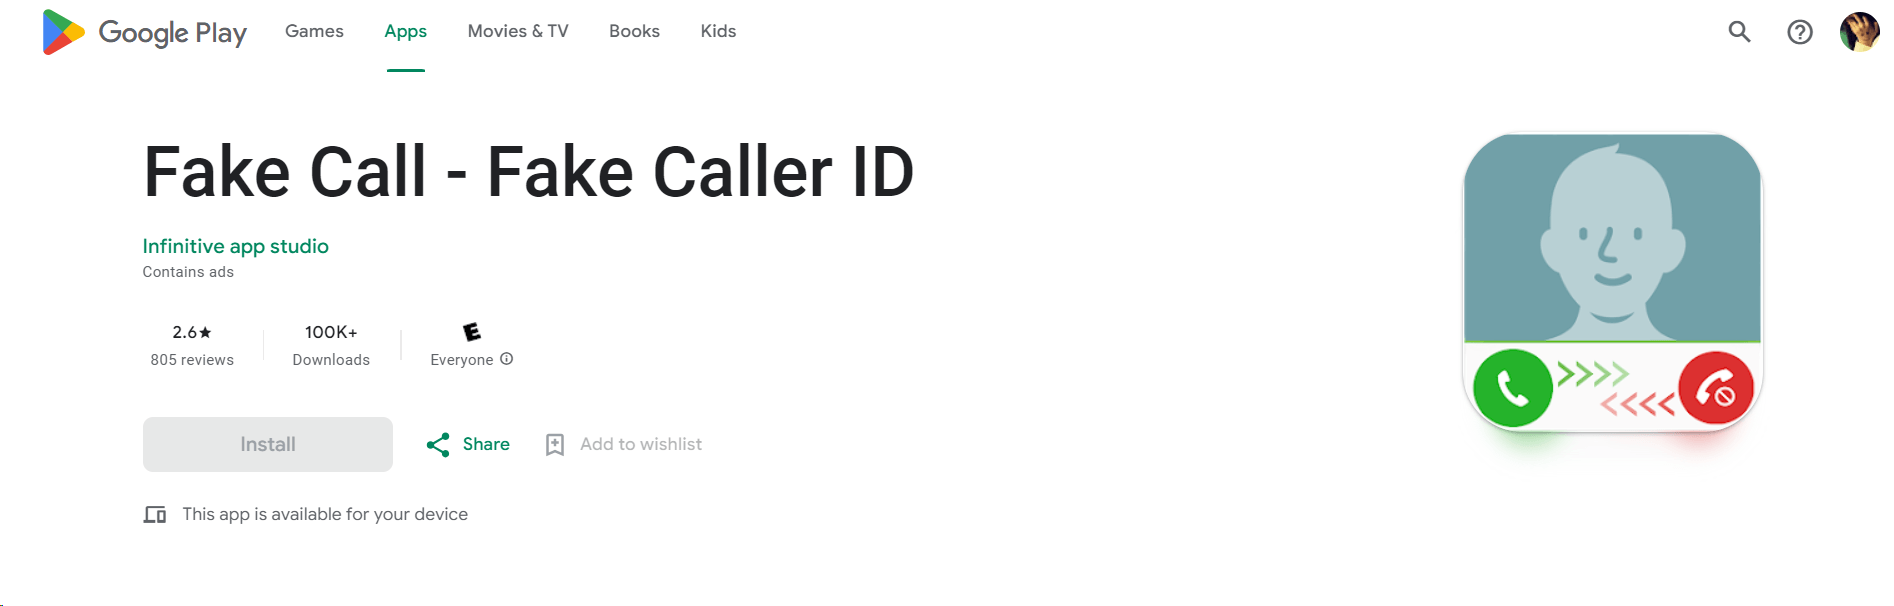 fake caller id text message